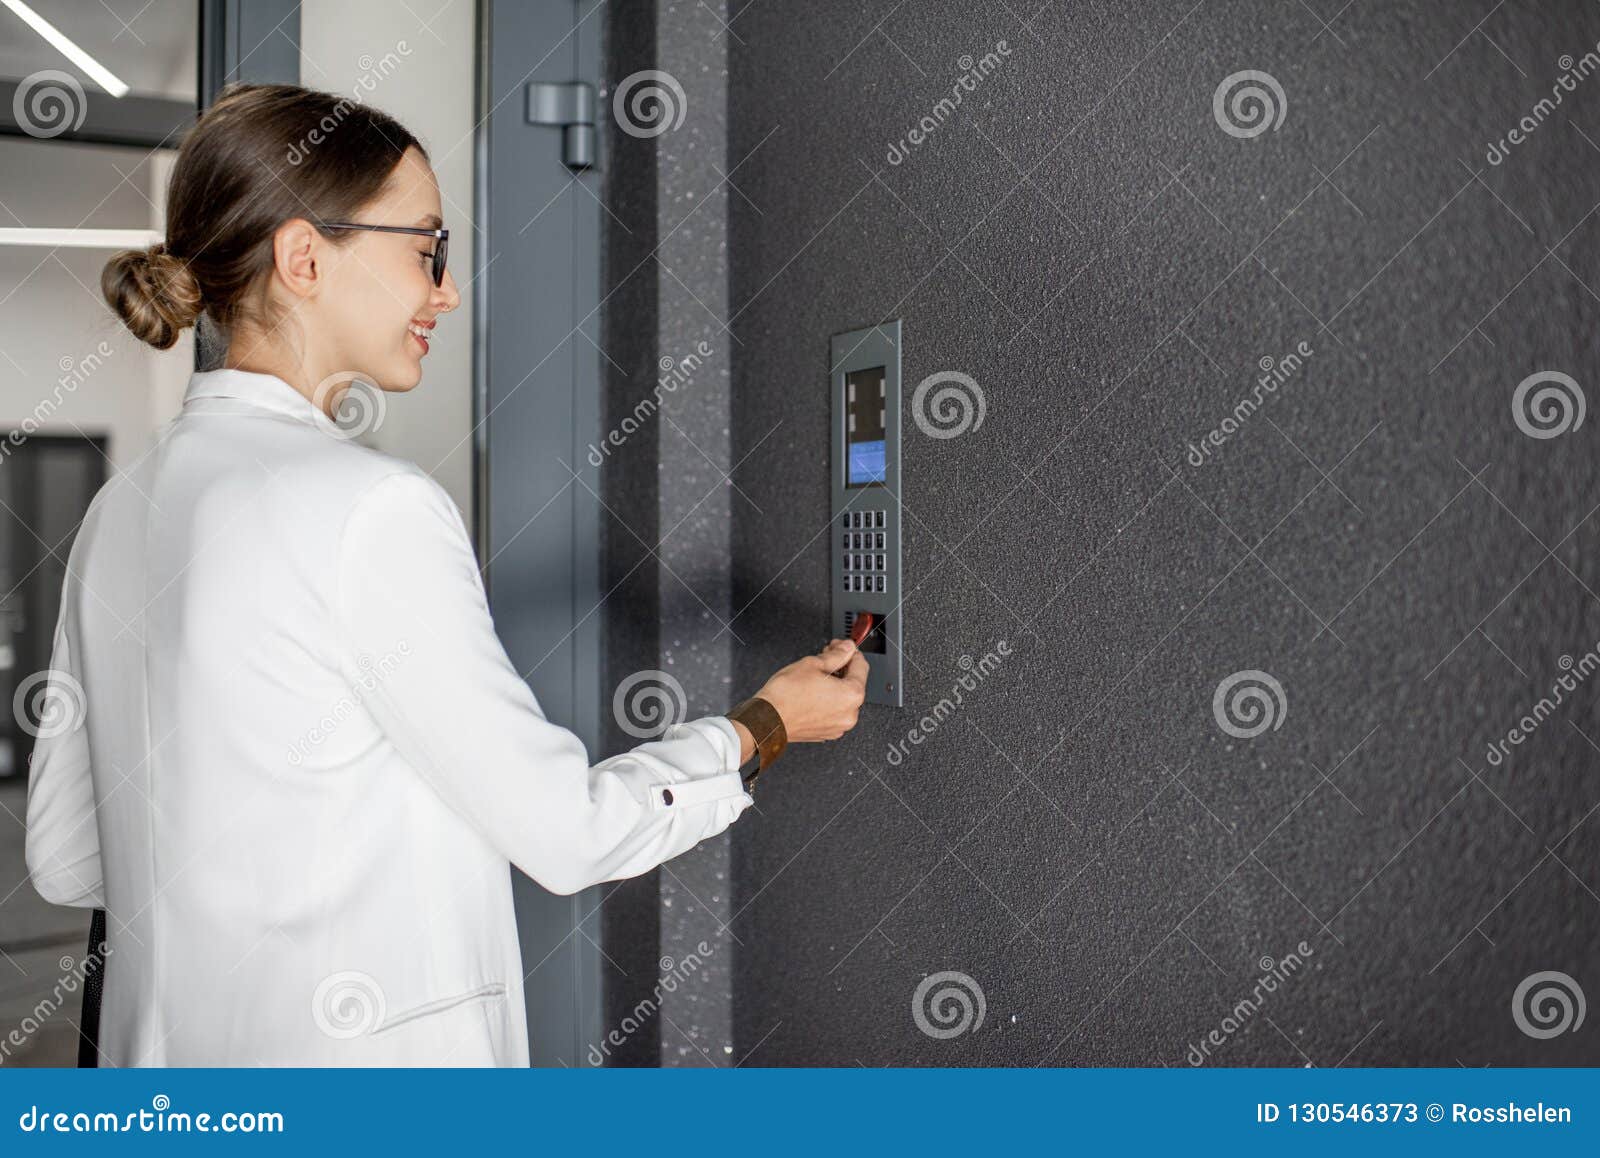 woman opening the door with keychain